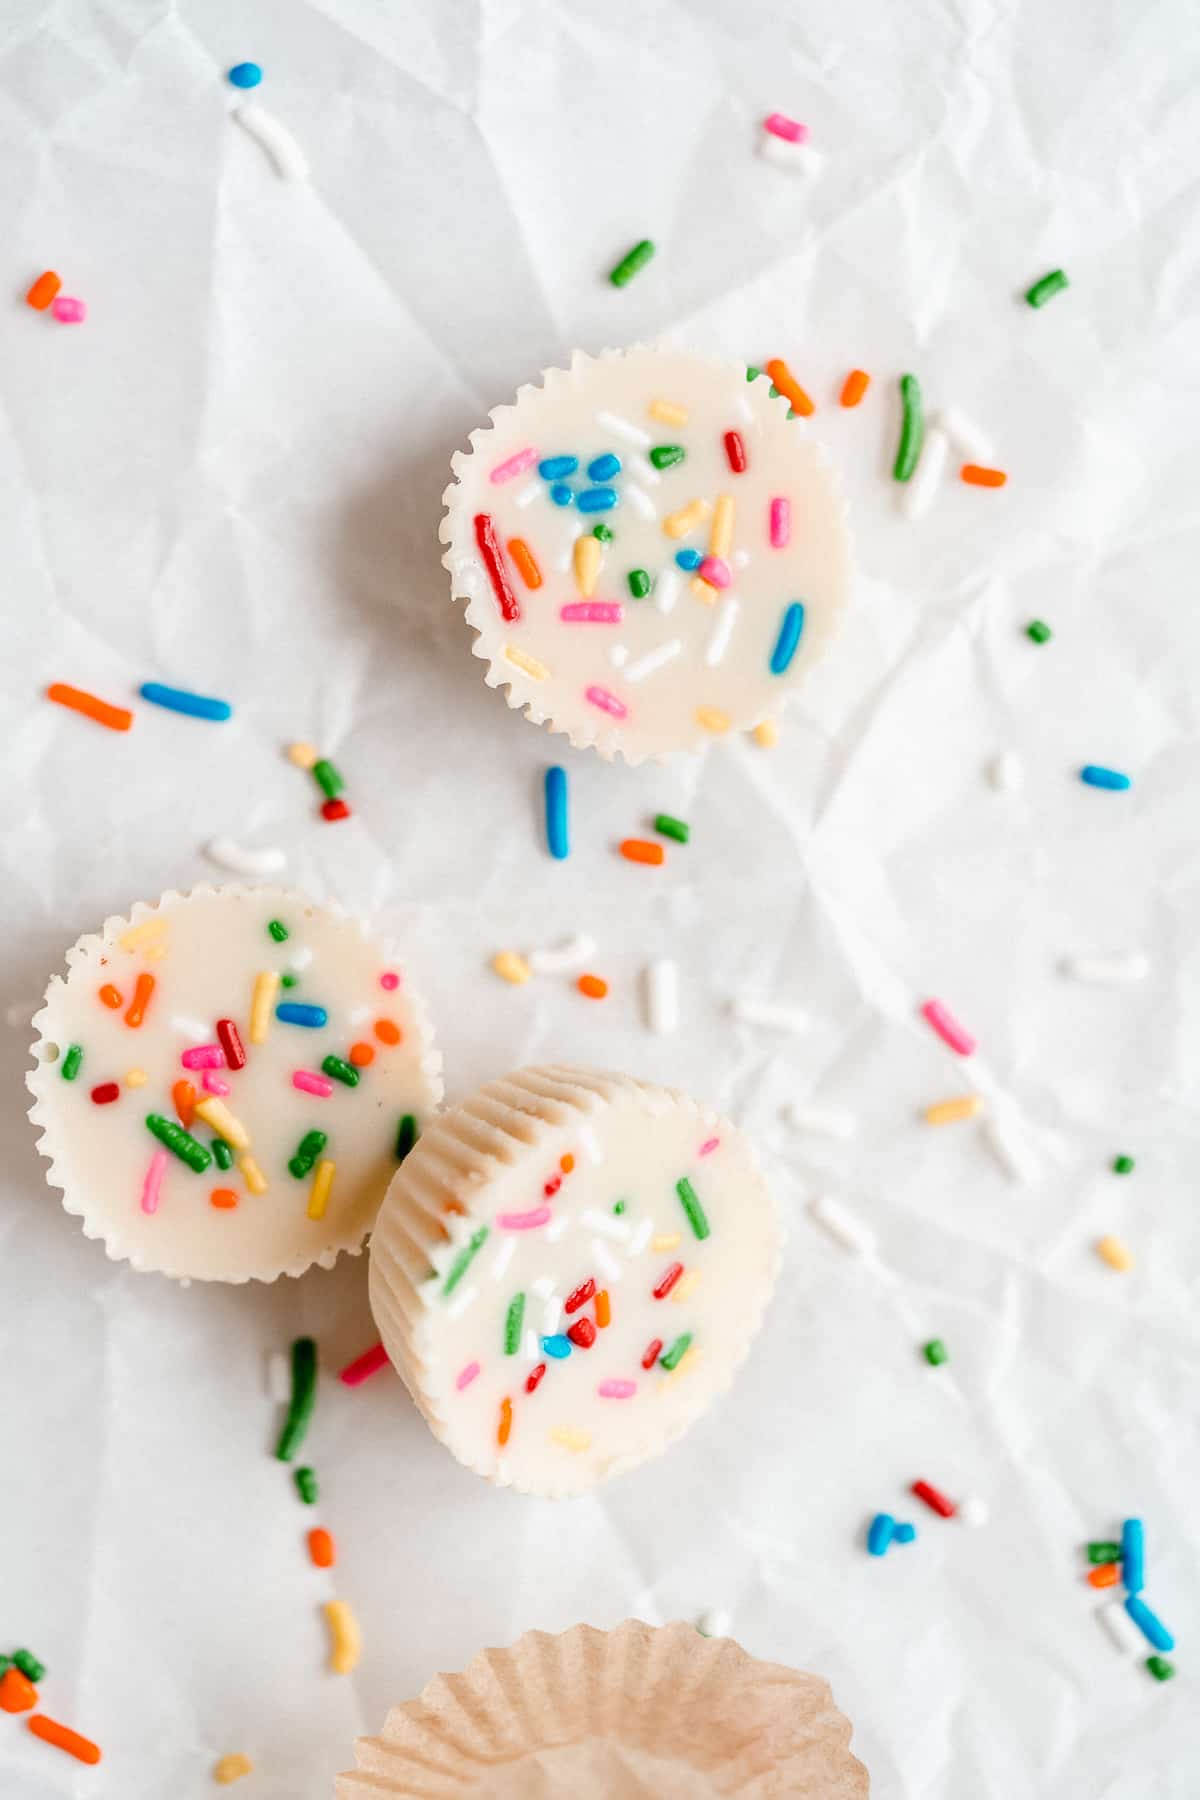 A couple of white chocolate peanut butter cups on white parchment paper with rainbow sprinkles